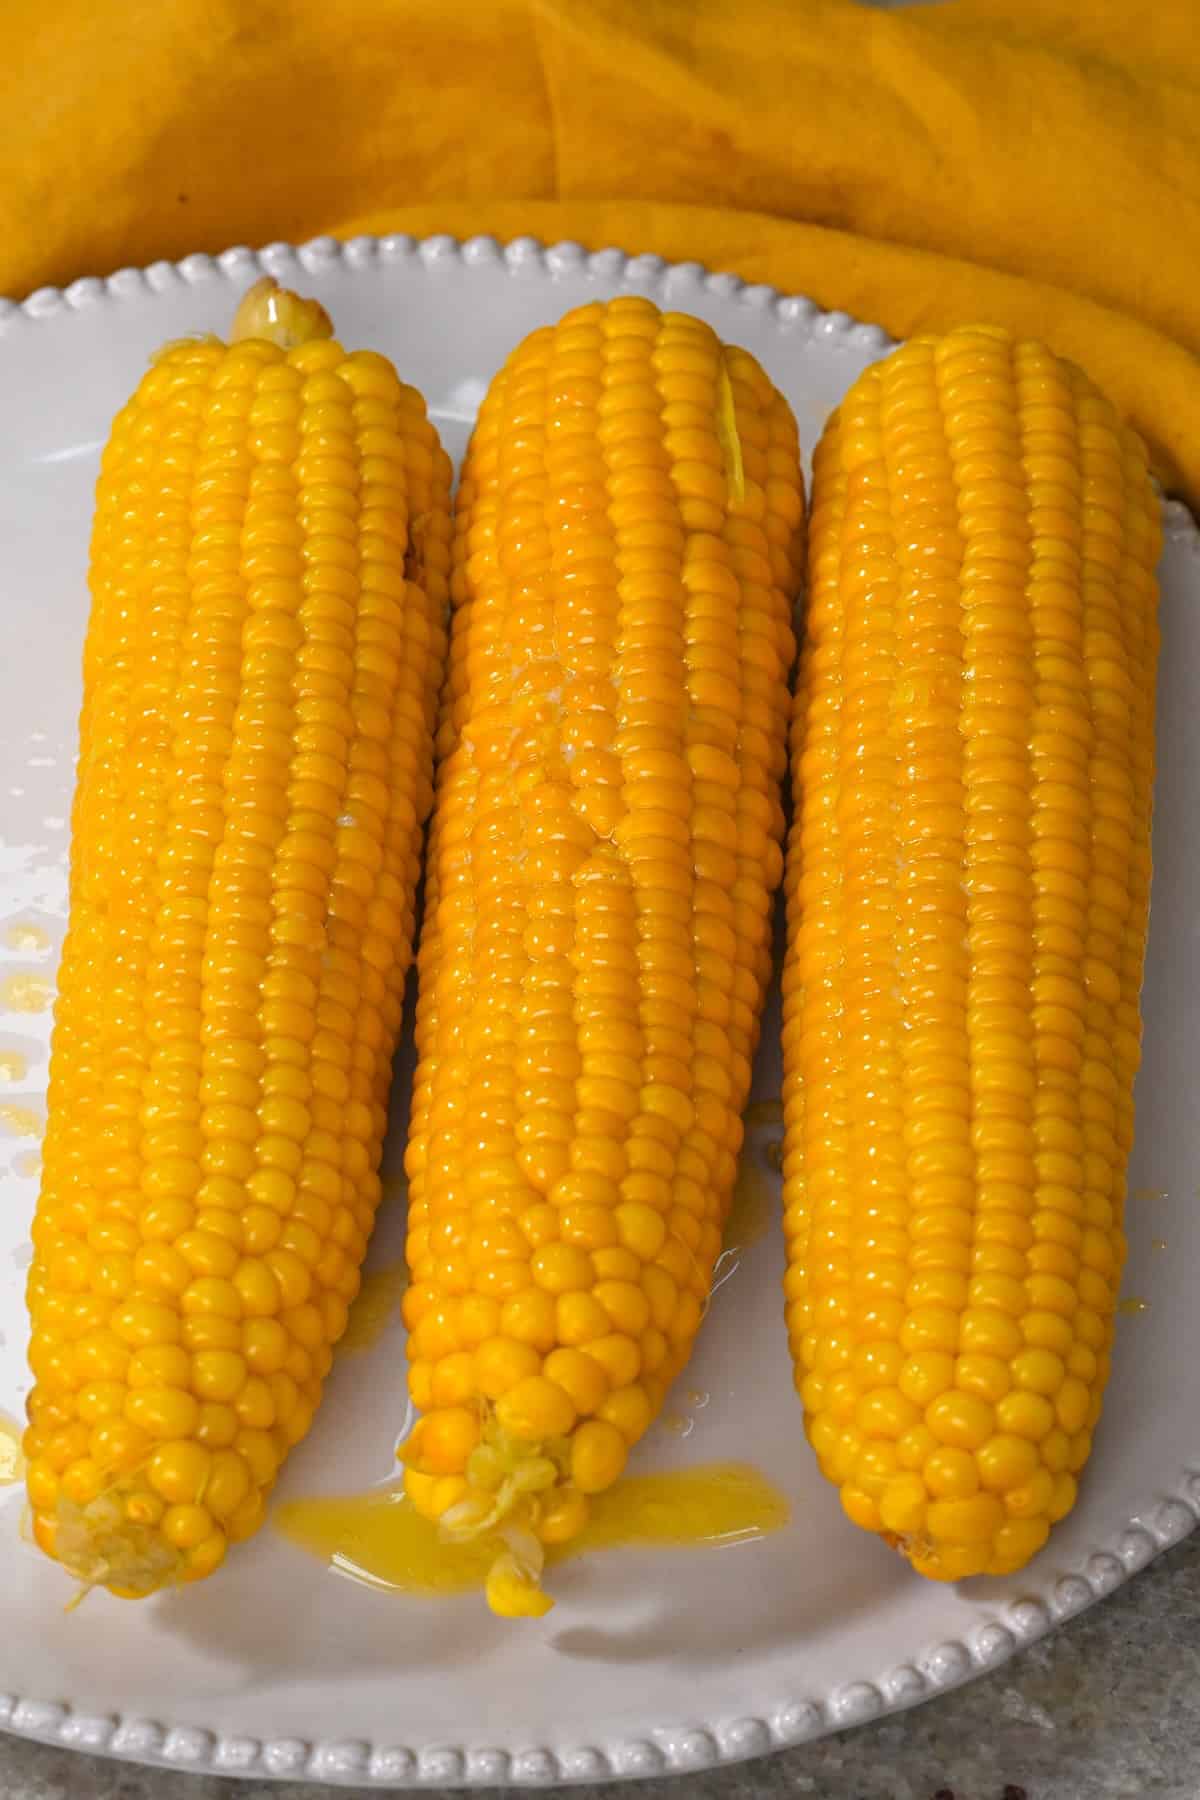 Boiled corn on the cob on a plate